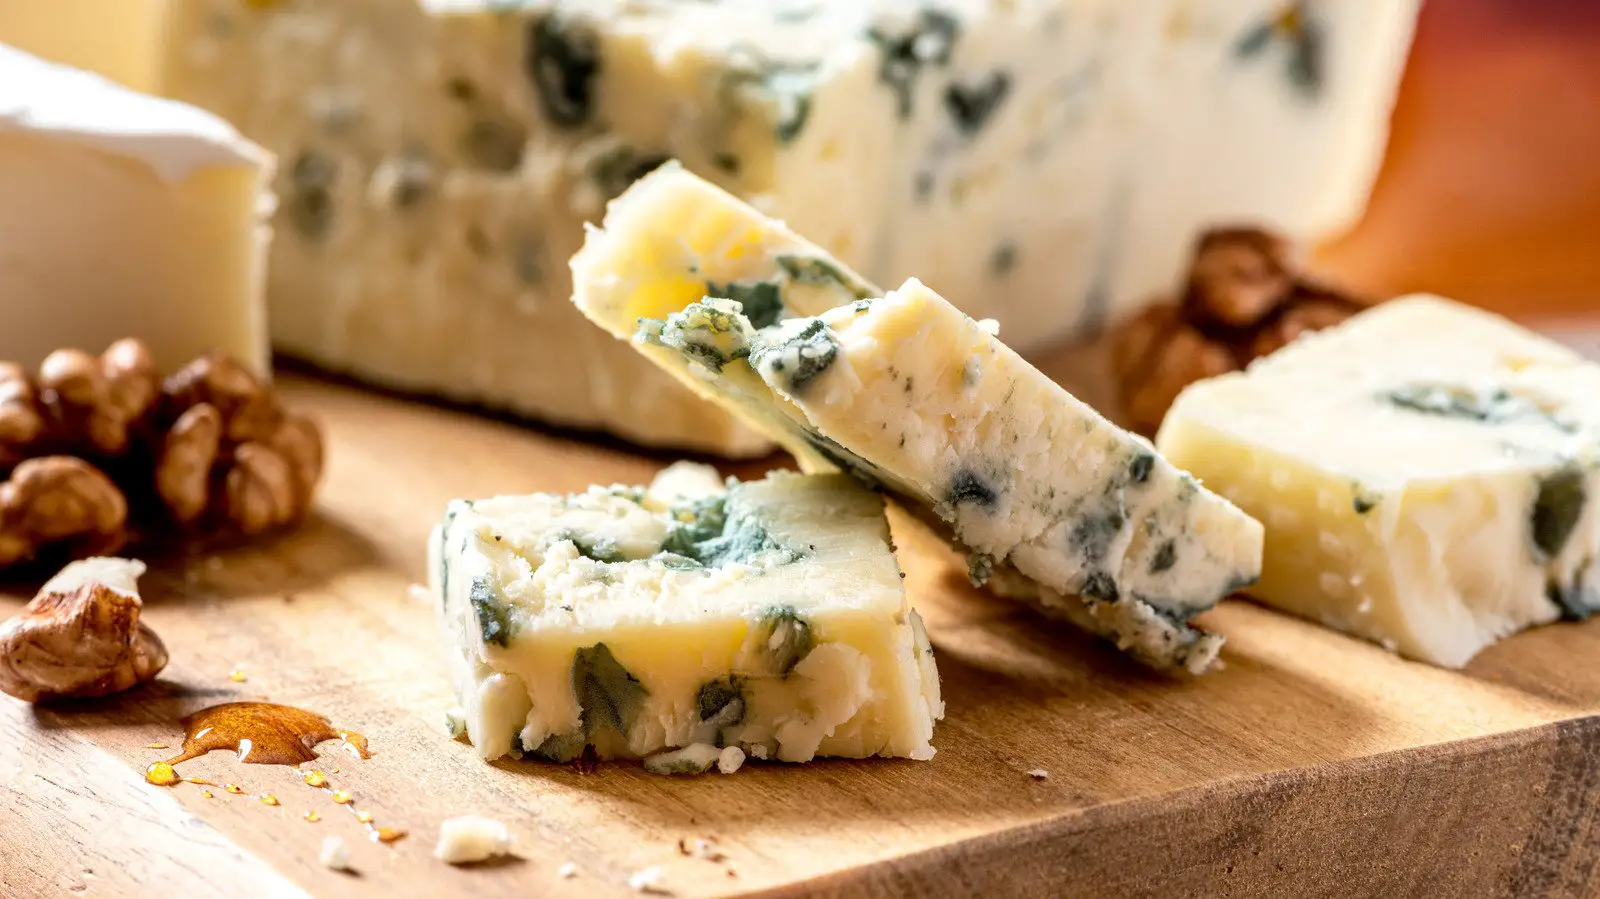 Does Blue Cheese Really Trigger Headaches?